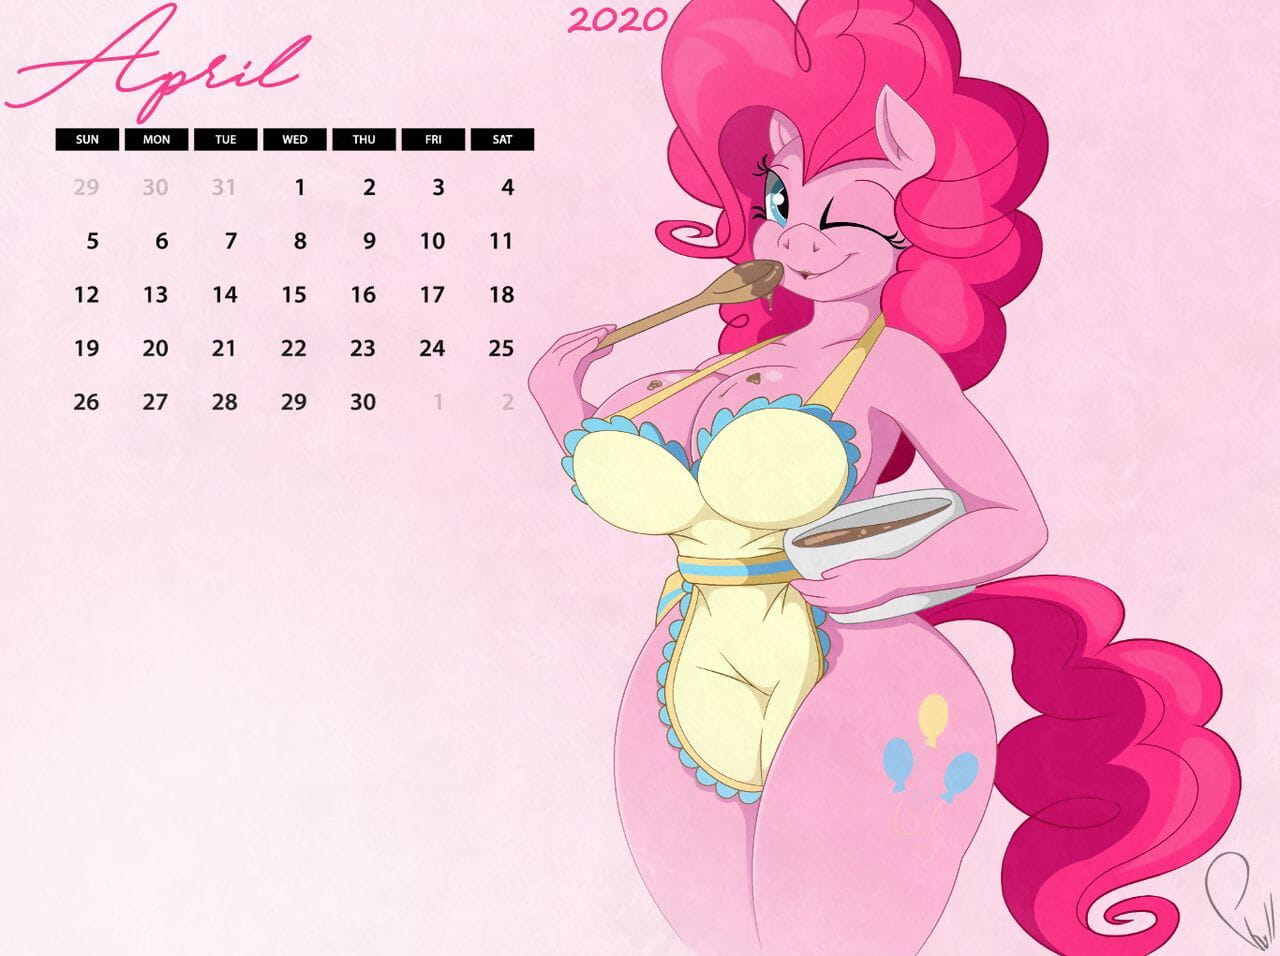 Phyll Anthro Calendar 2020 page 1